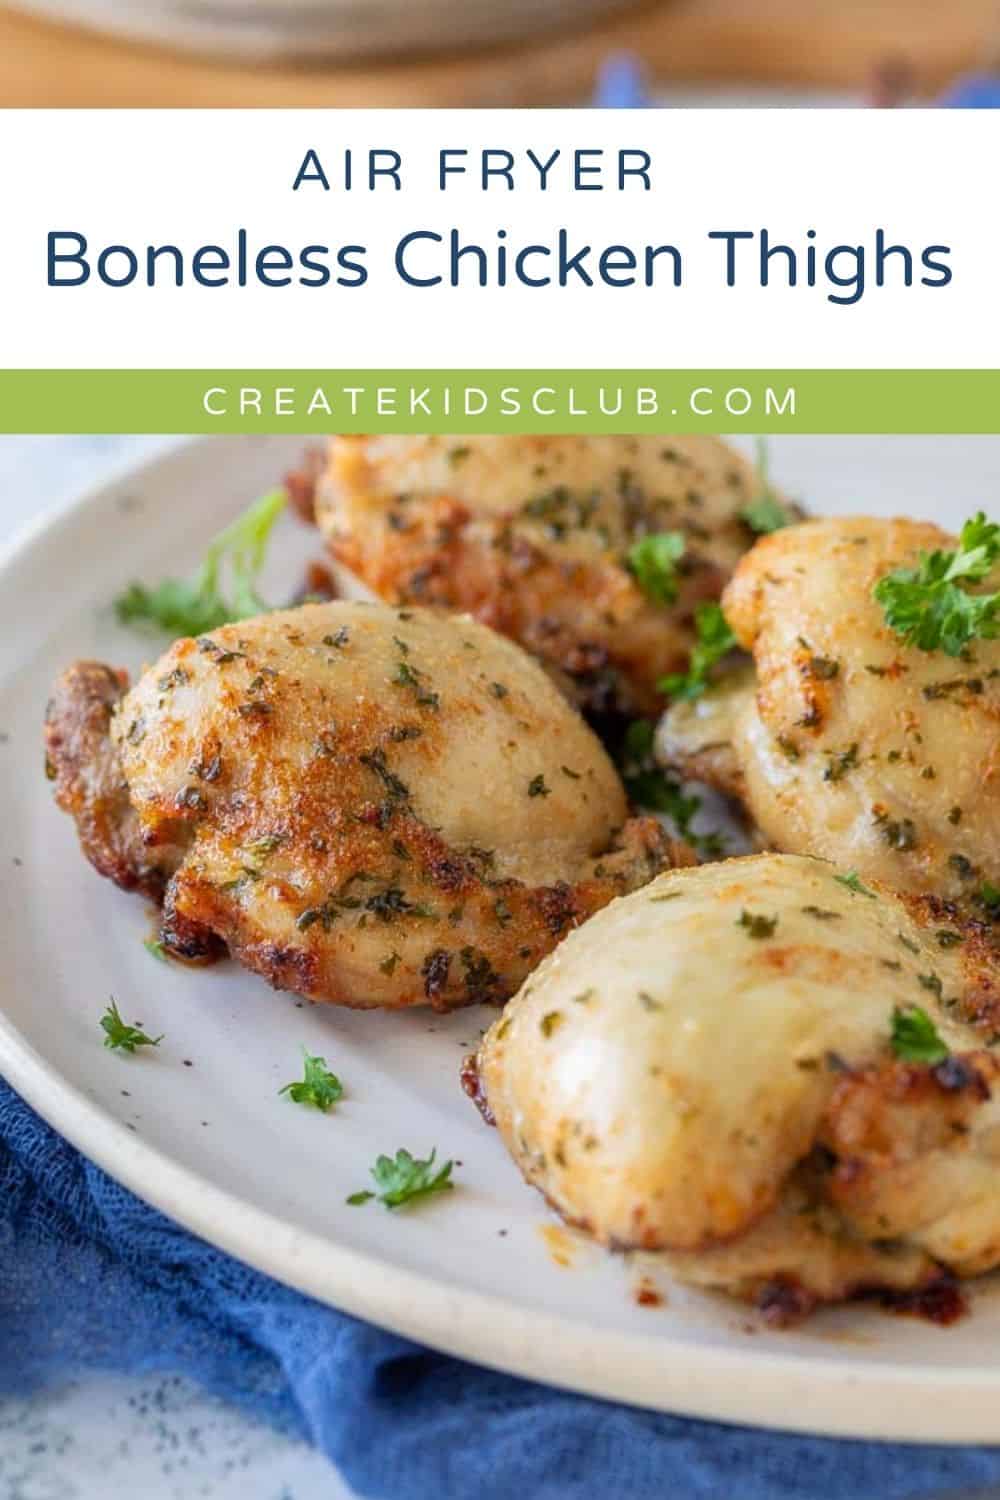 Pin showing air fried boneless chicken thighs on a plate.